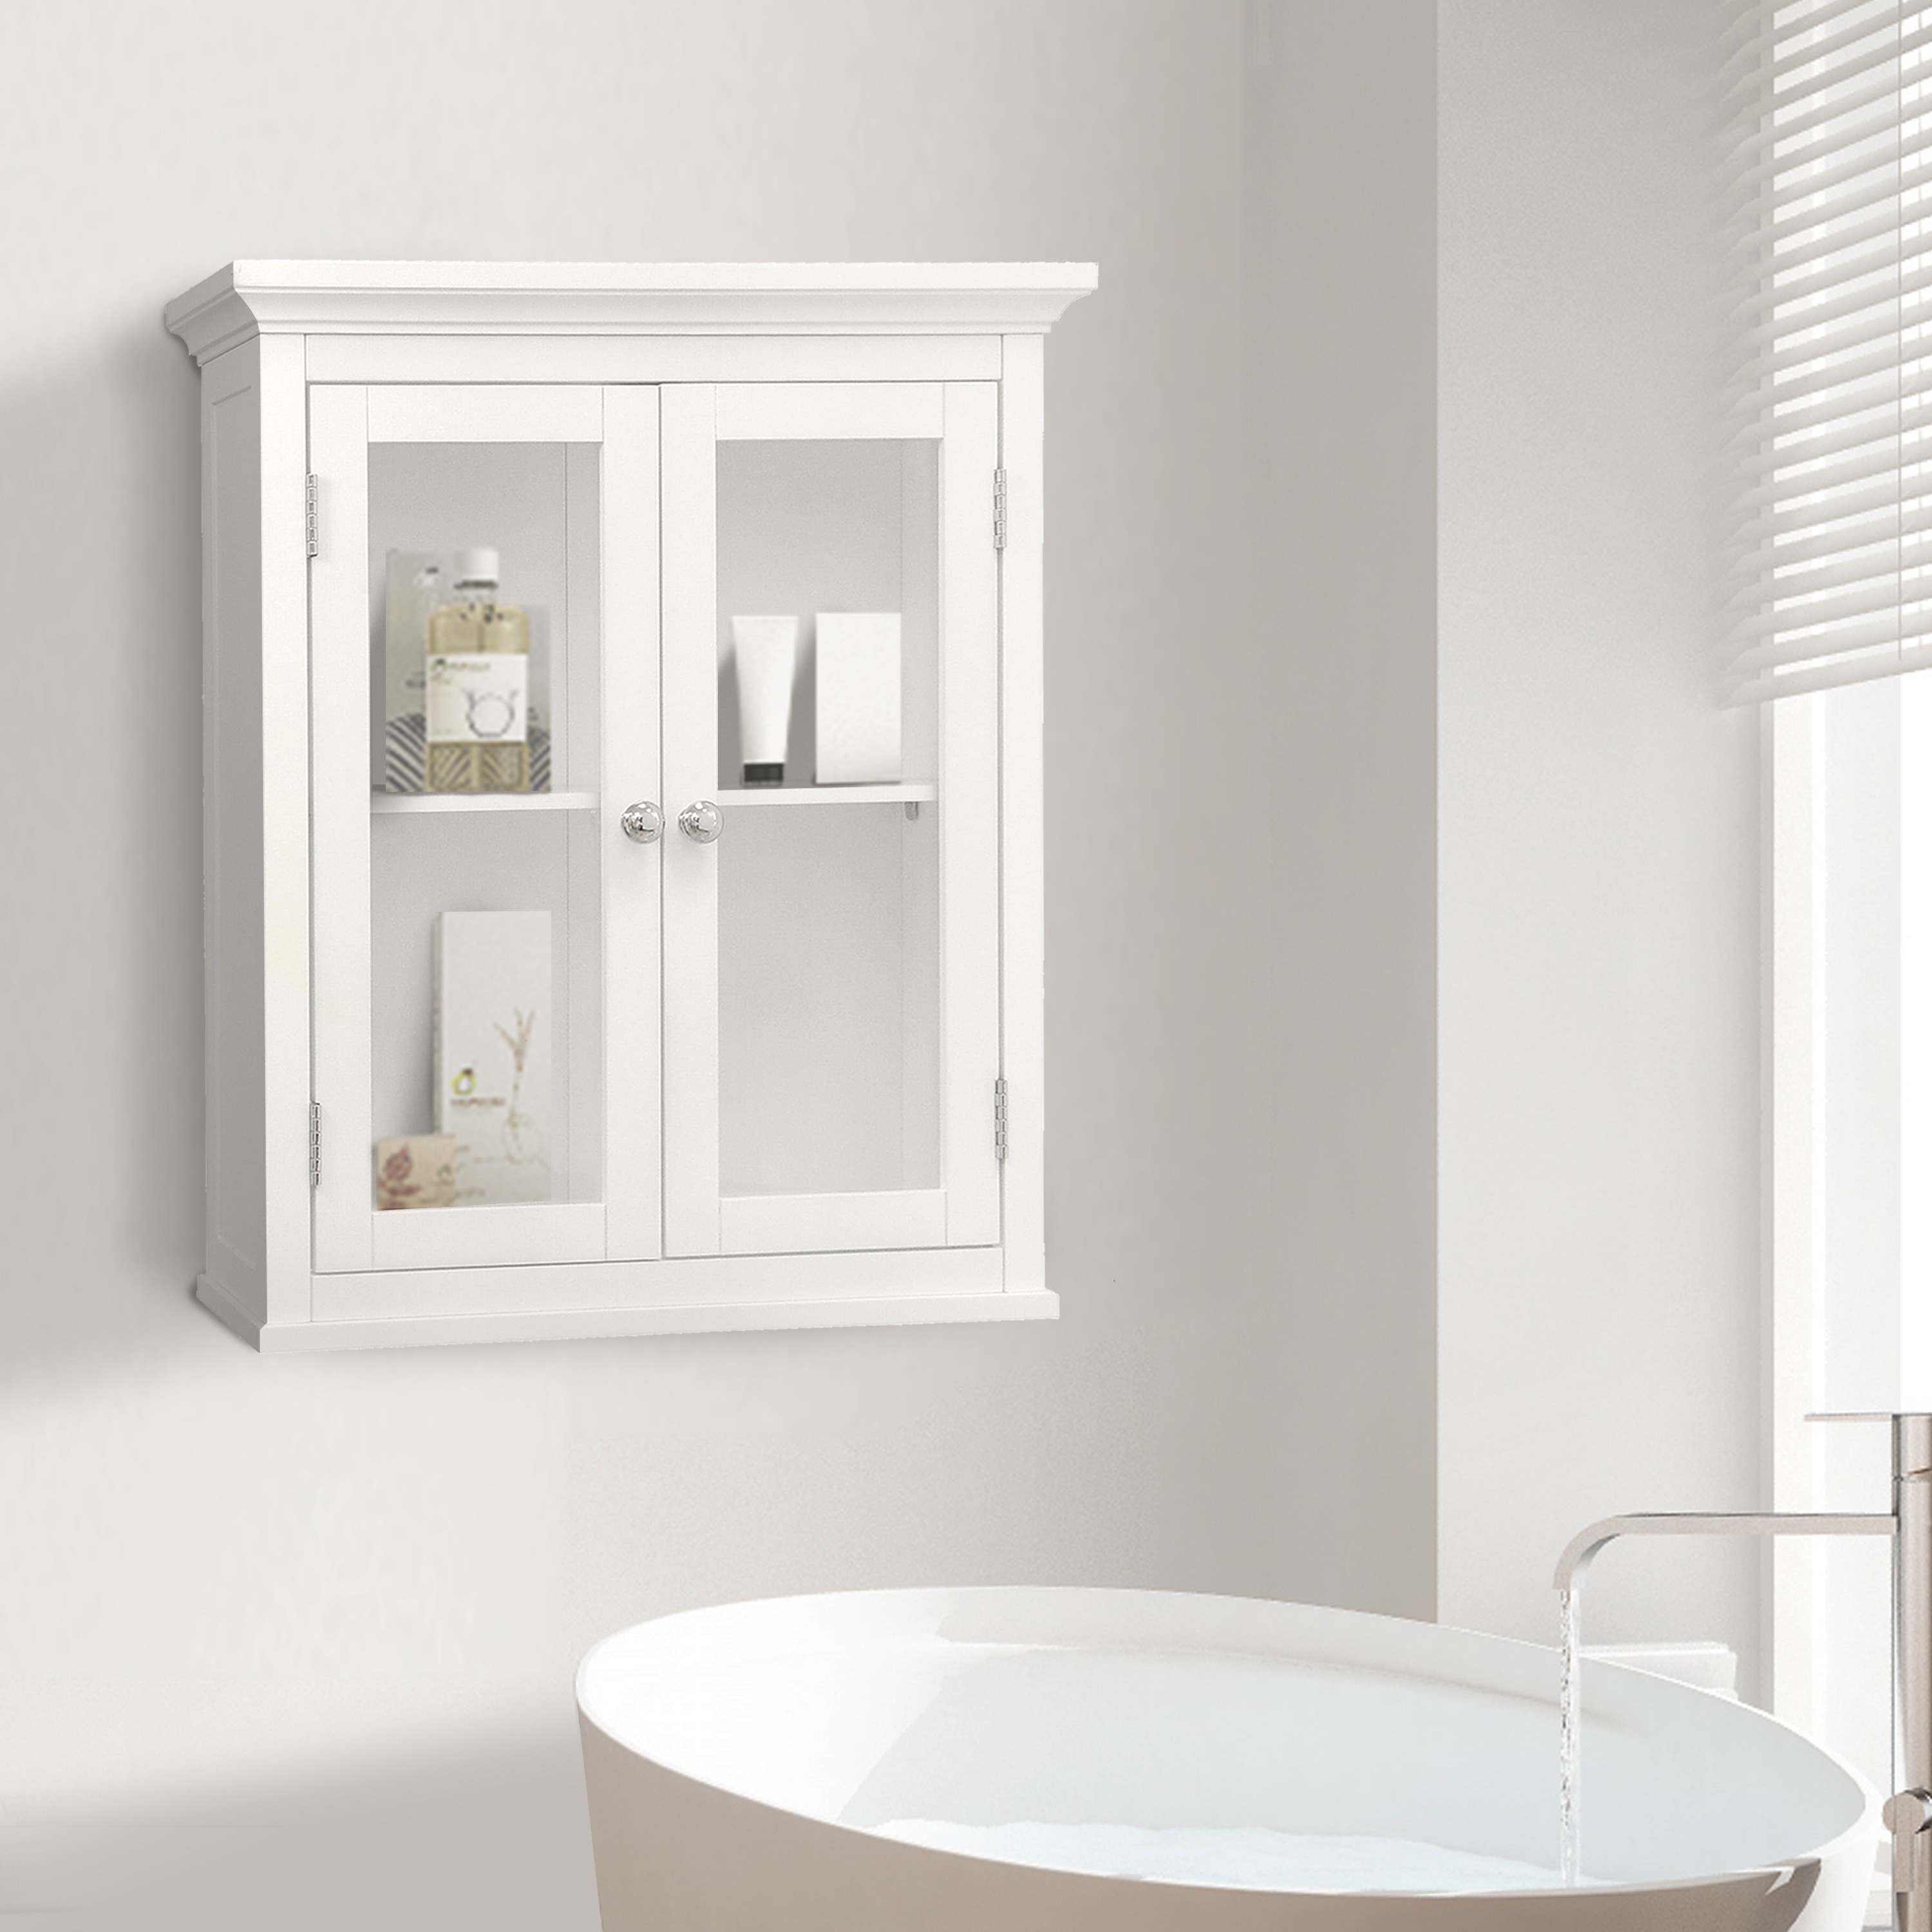 Teamson Home Madison 20-in x 24-in x 7-in White Bathroom Wall Cabinet ...